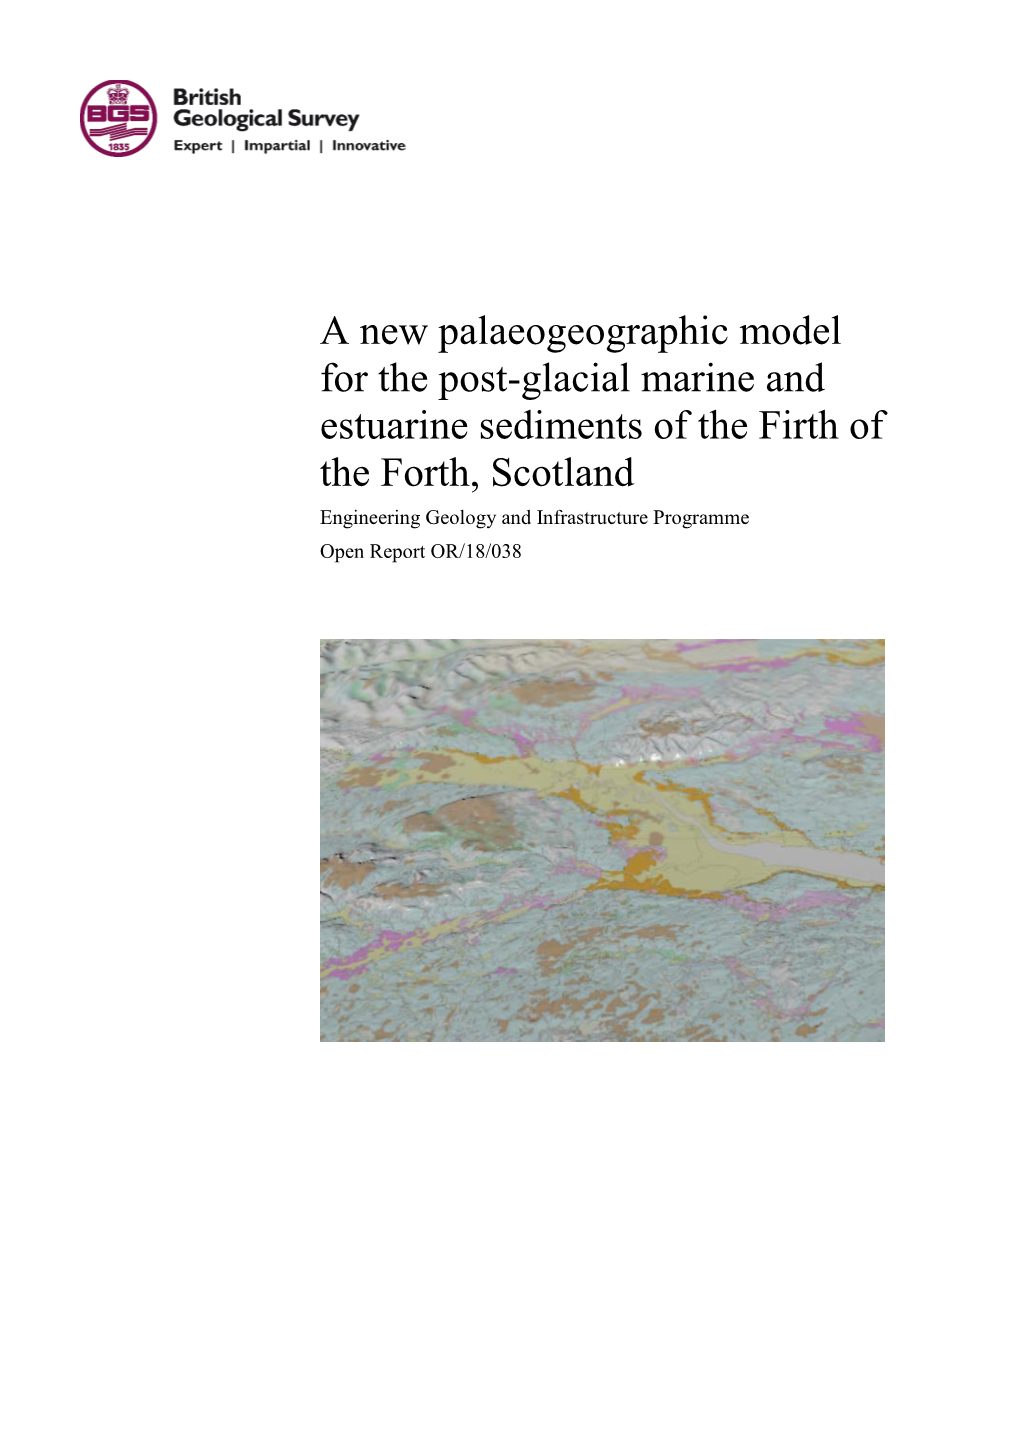 A New Palaeogeographic Model for the Post-Glacial Marine And